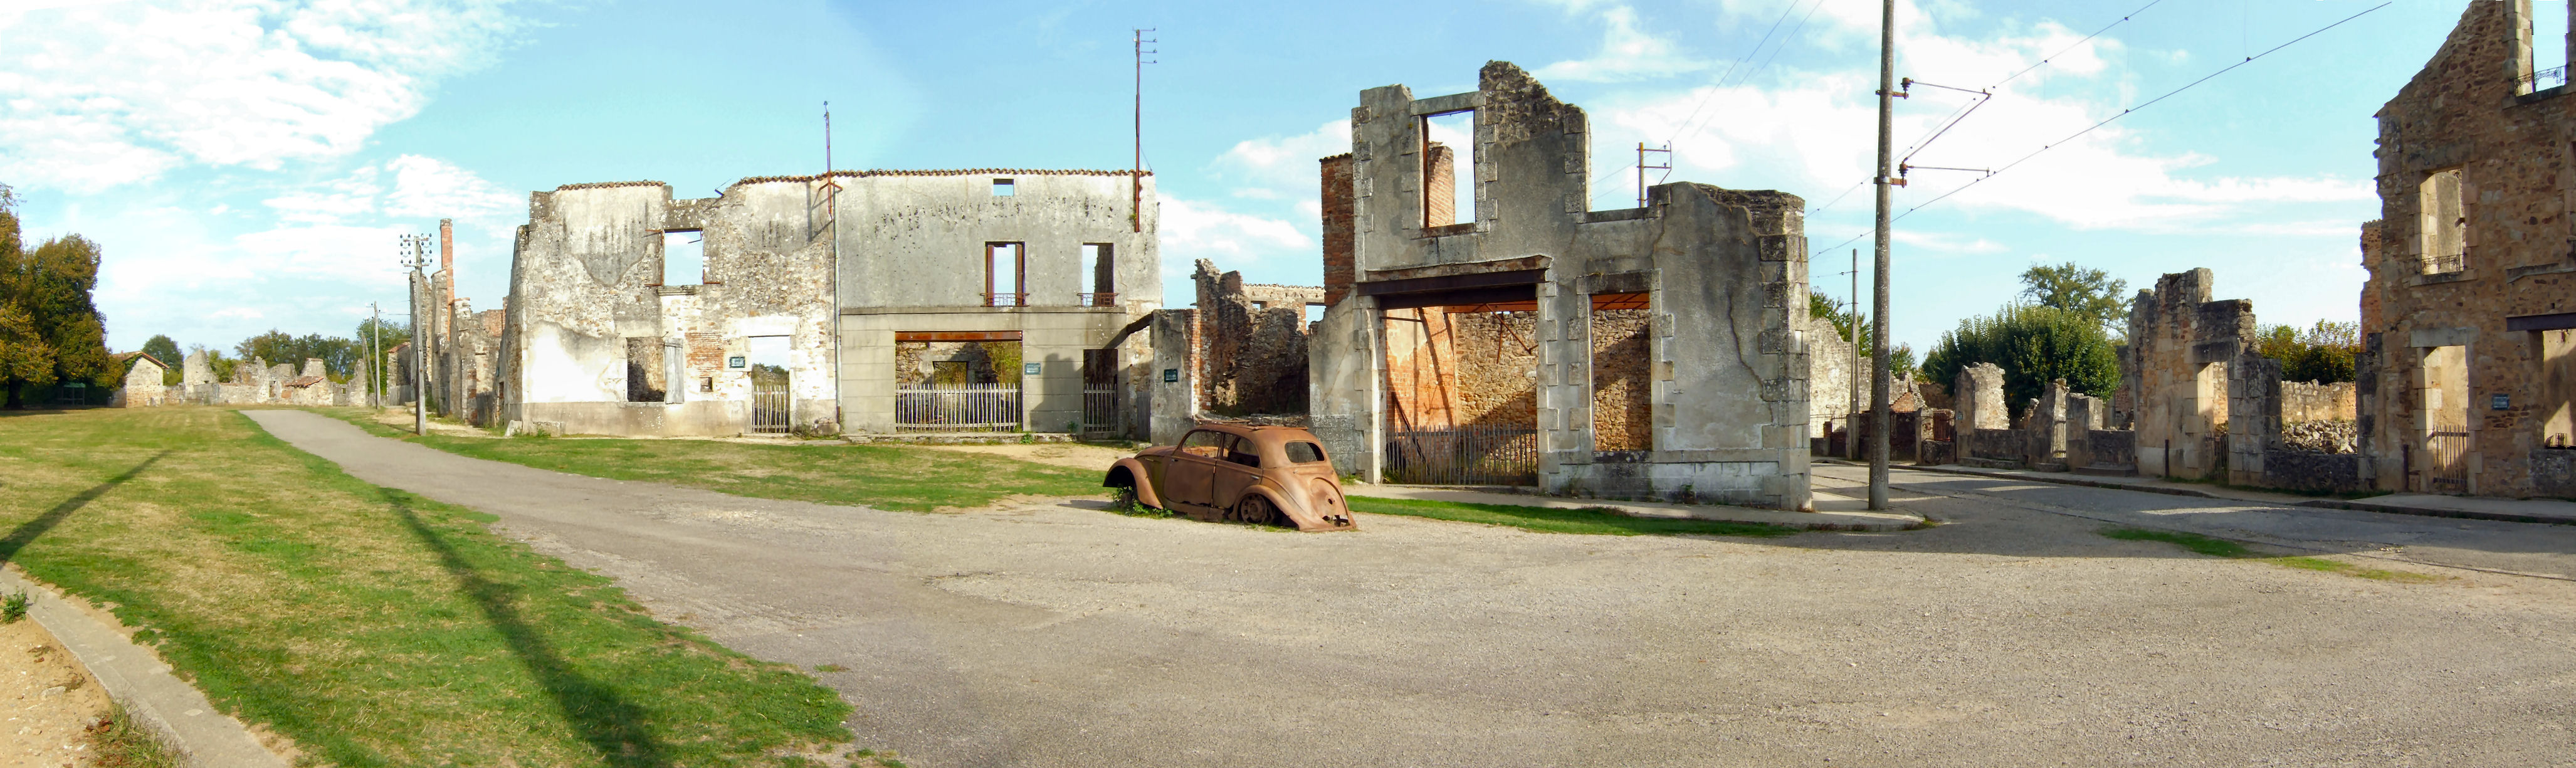 The Champ de Foire and the doctor's car at Oradour-sur-Glane looking south